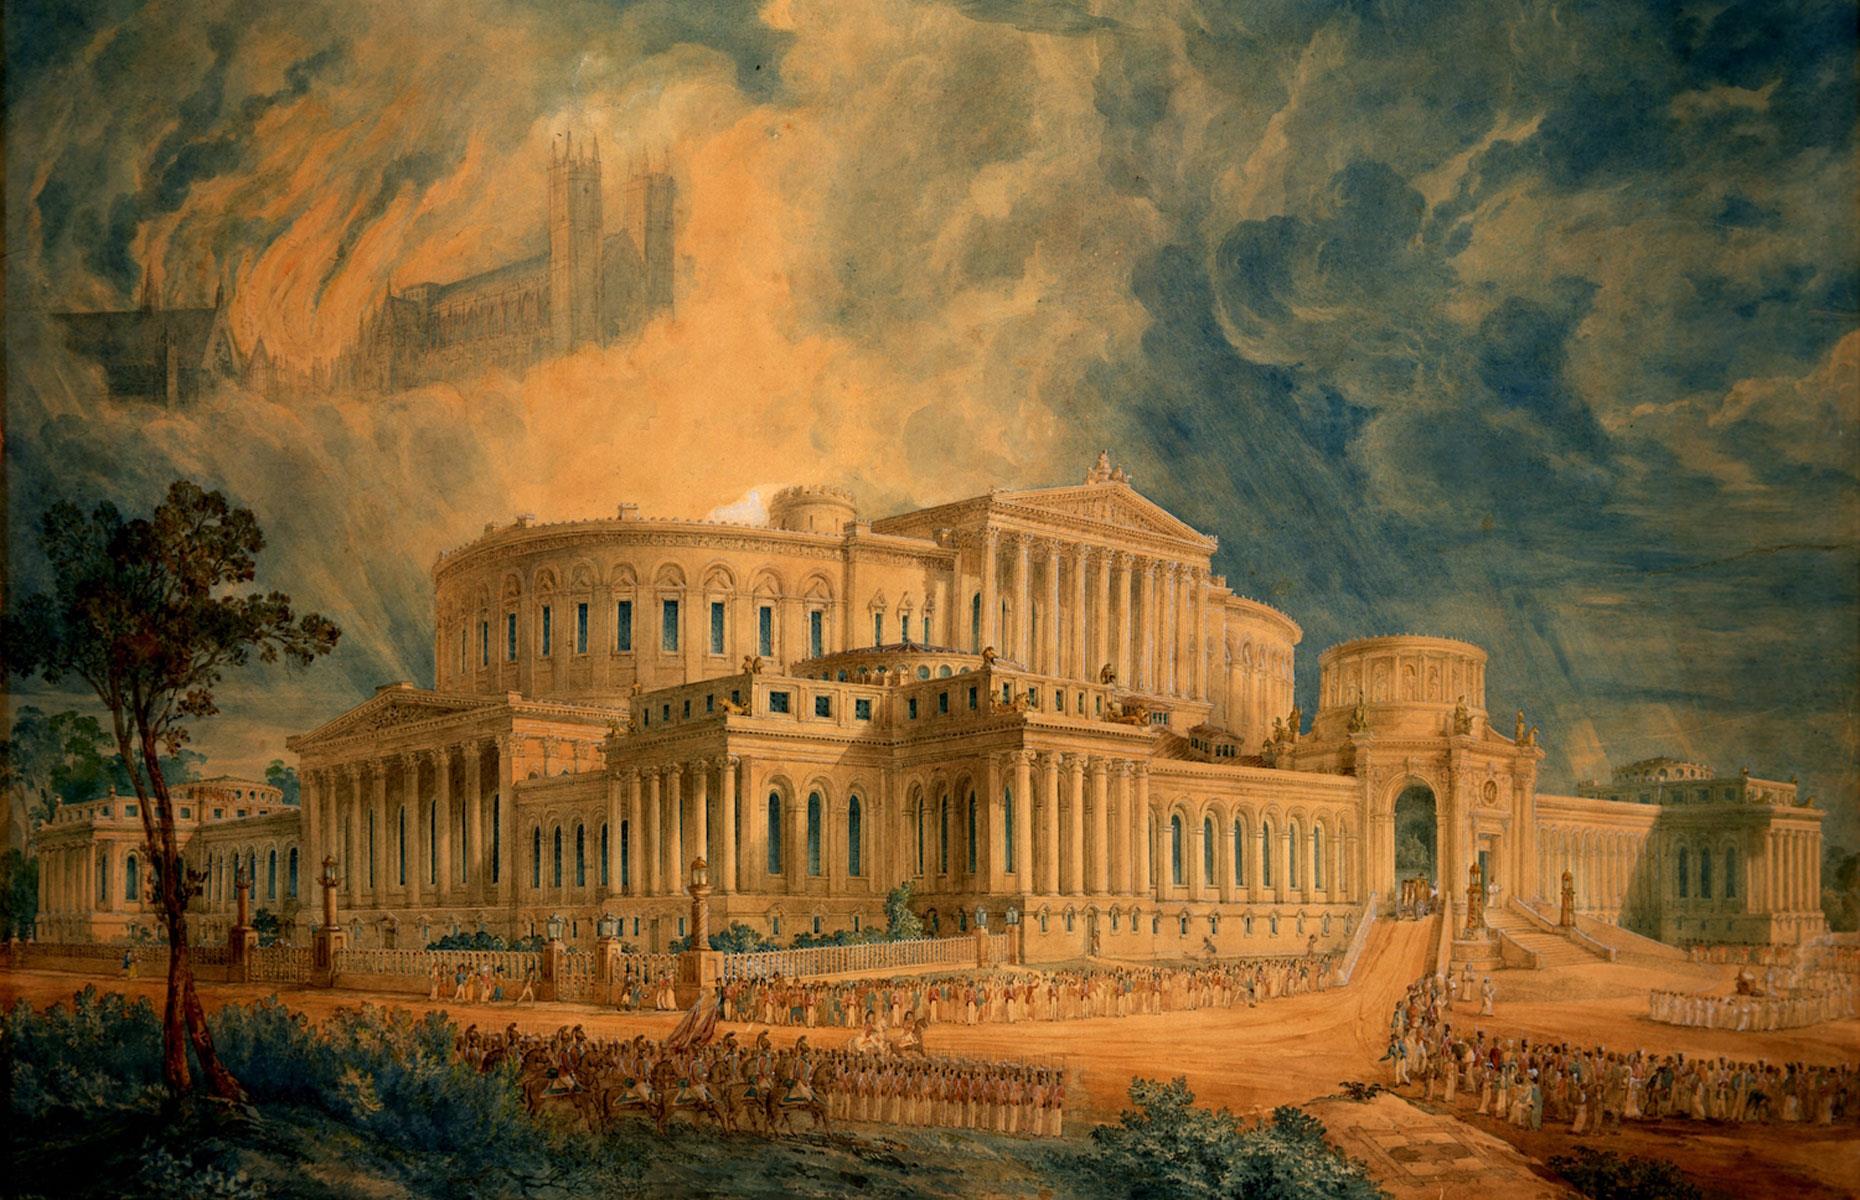 A total of 97 entries were received in the competition to design the replacement parliament building, including this spectacular Neoclassical palace by visionary architect Joseph Gandy, which would have been located in London's St James's Park.